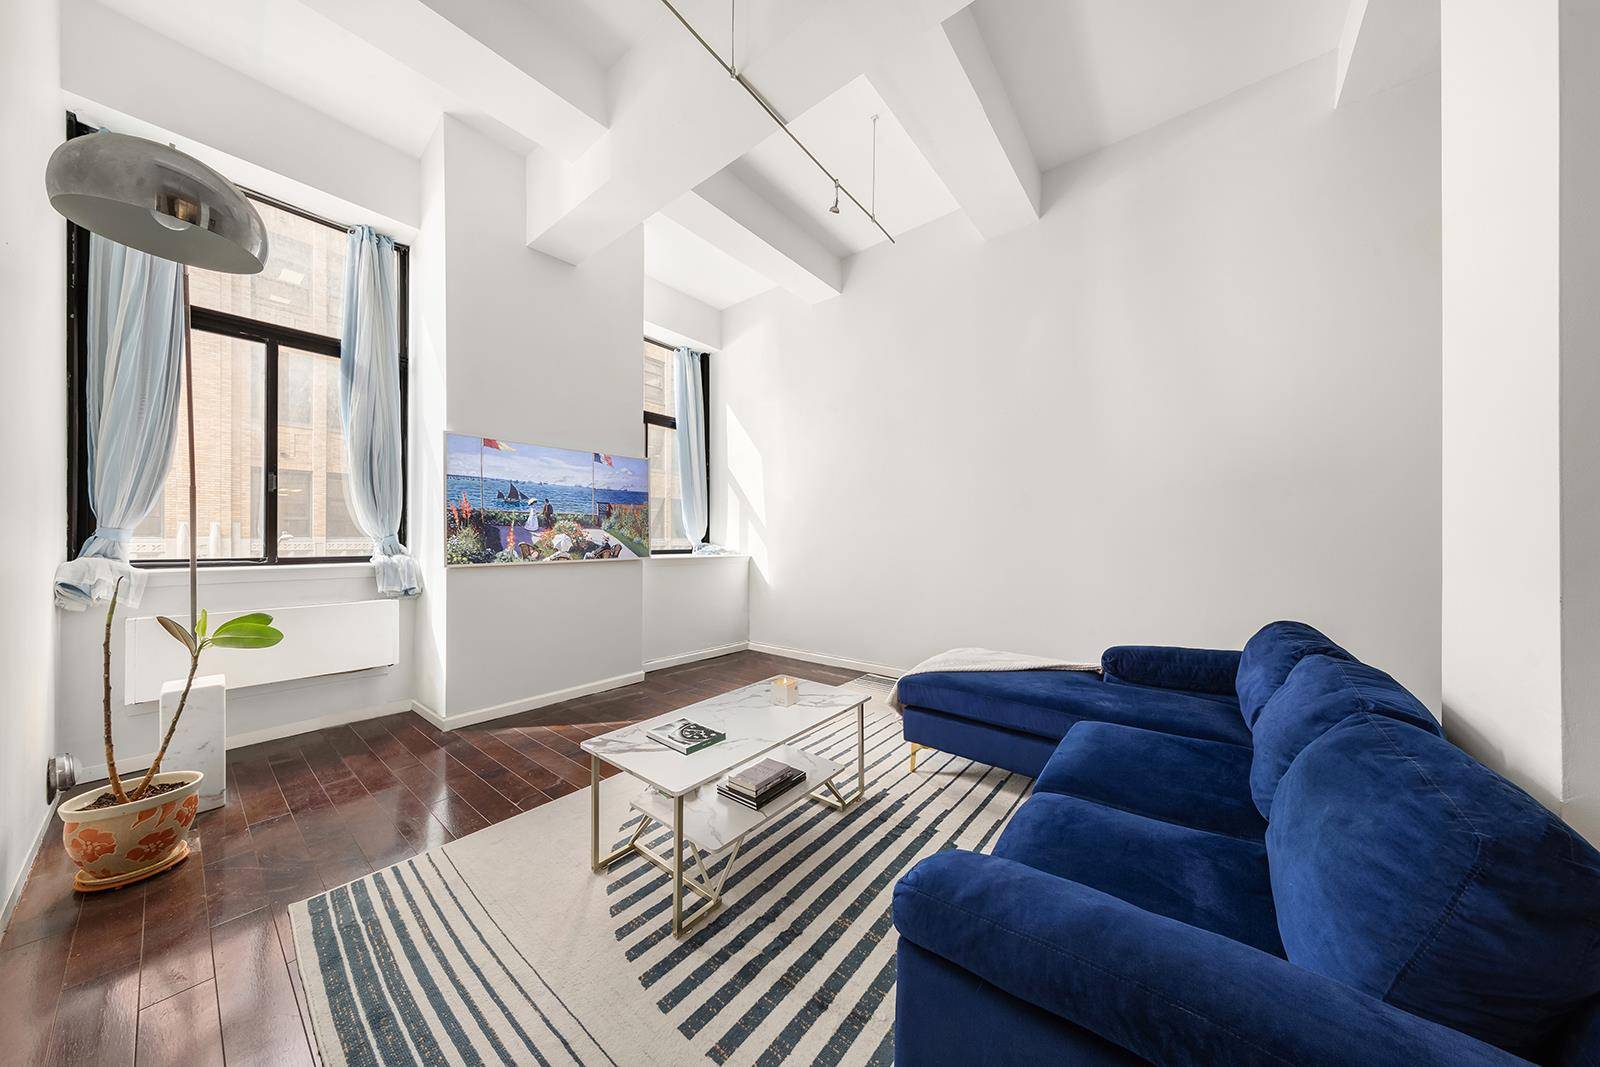 Introducing 3C at 310 East 46th Street A beautifully renovated loft style apartment with 12.